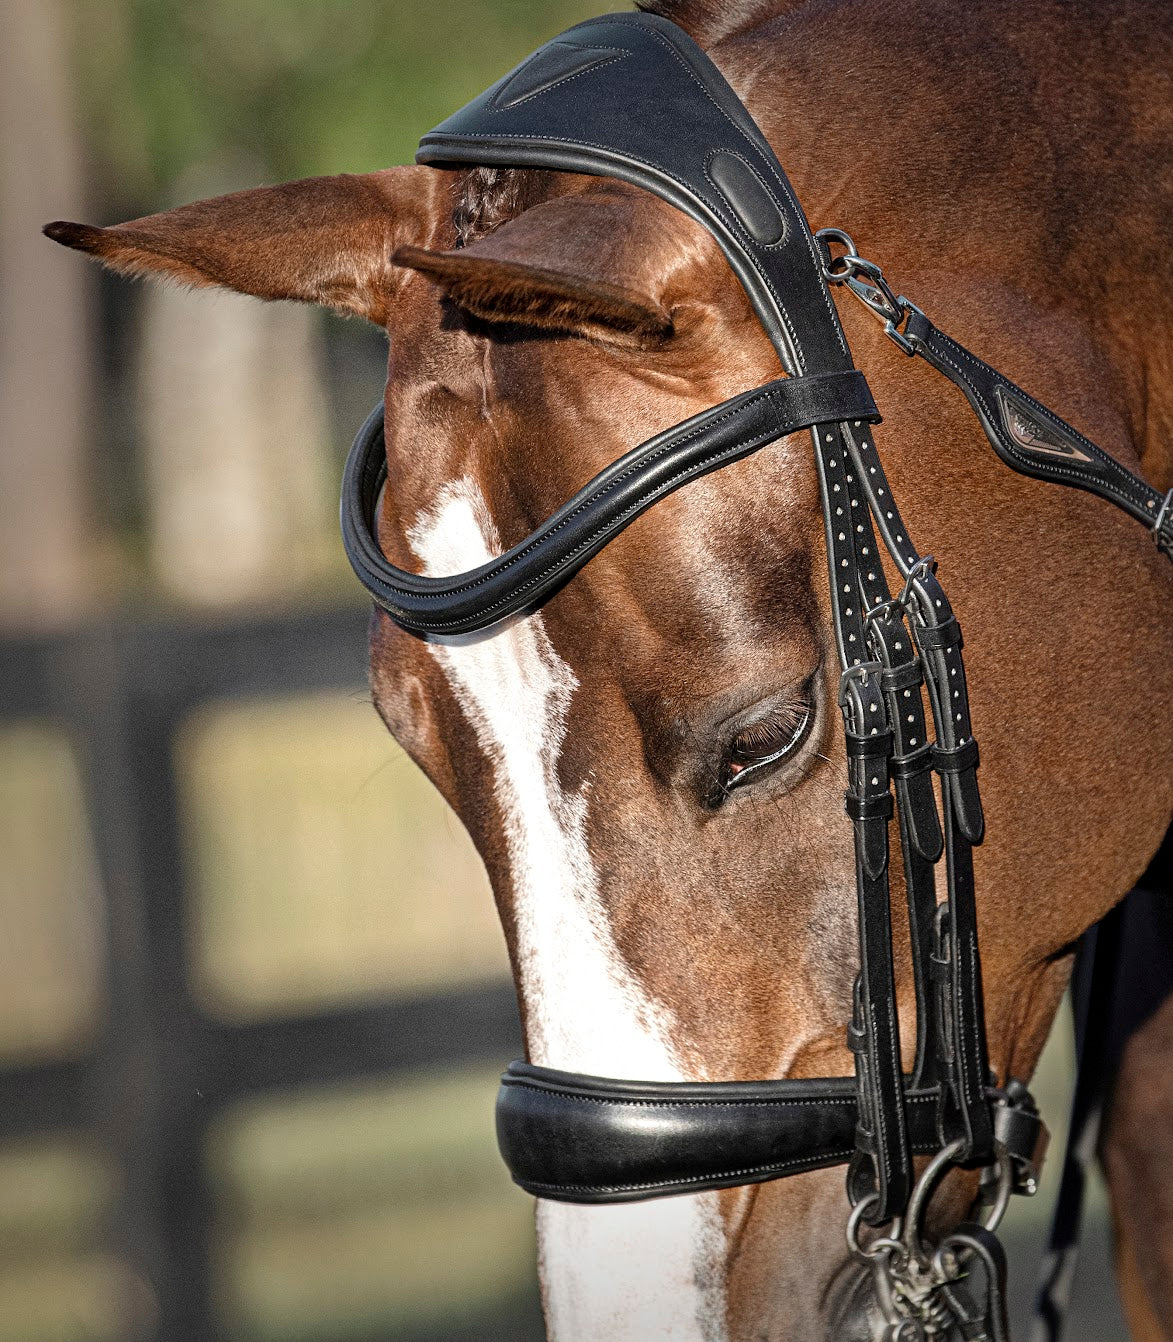 The Equiline Anatomical Headpiece. Made in beautiful Italian leather and available in black or brown. This headpiece is designed to relieve poll pressure and is lined with padding to keep your horse comfortable and stress free when being exercised.